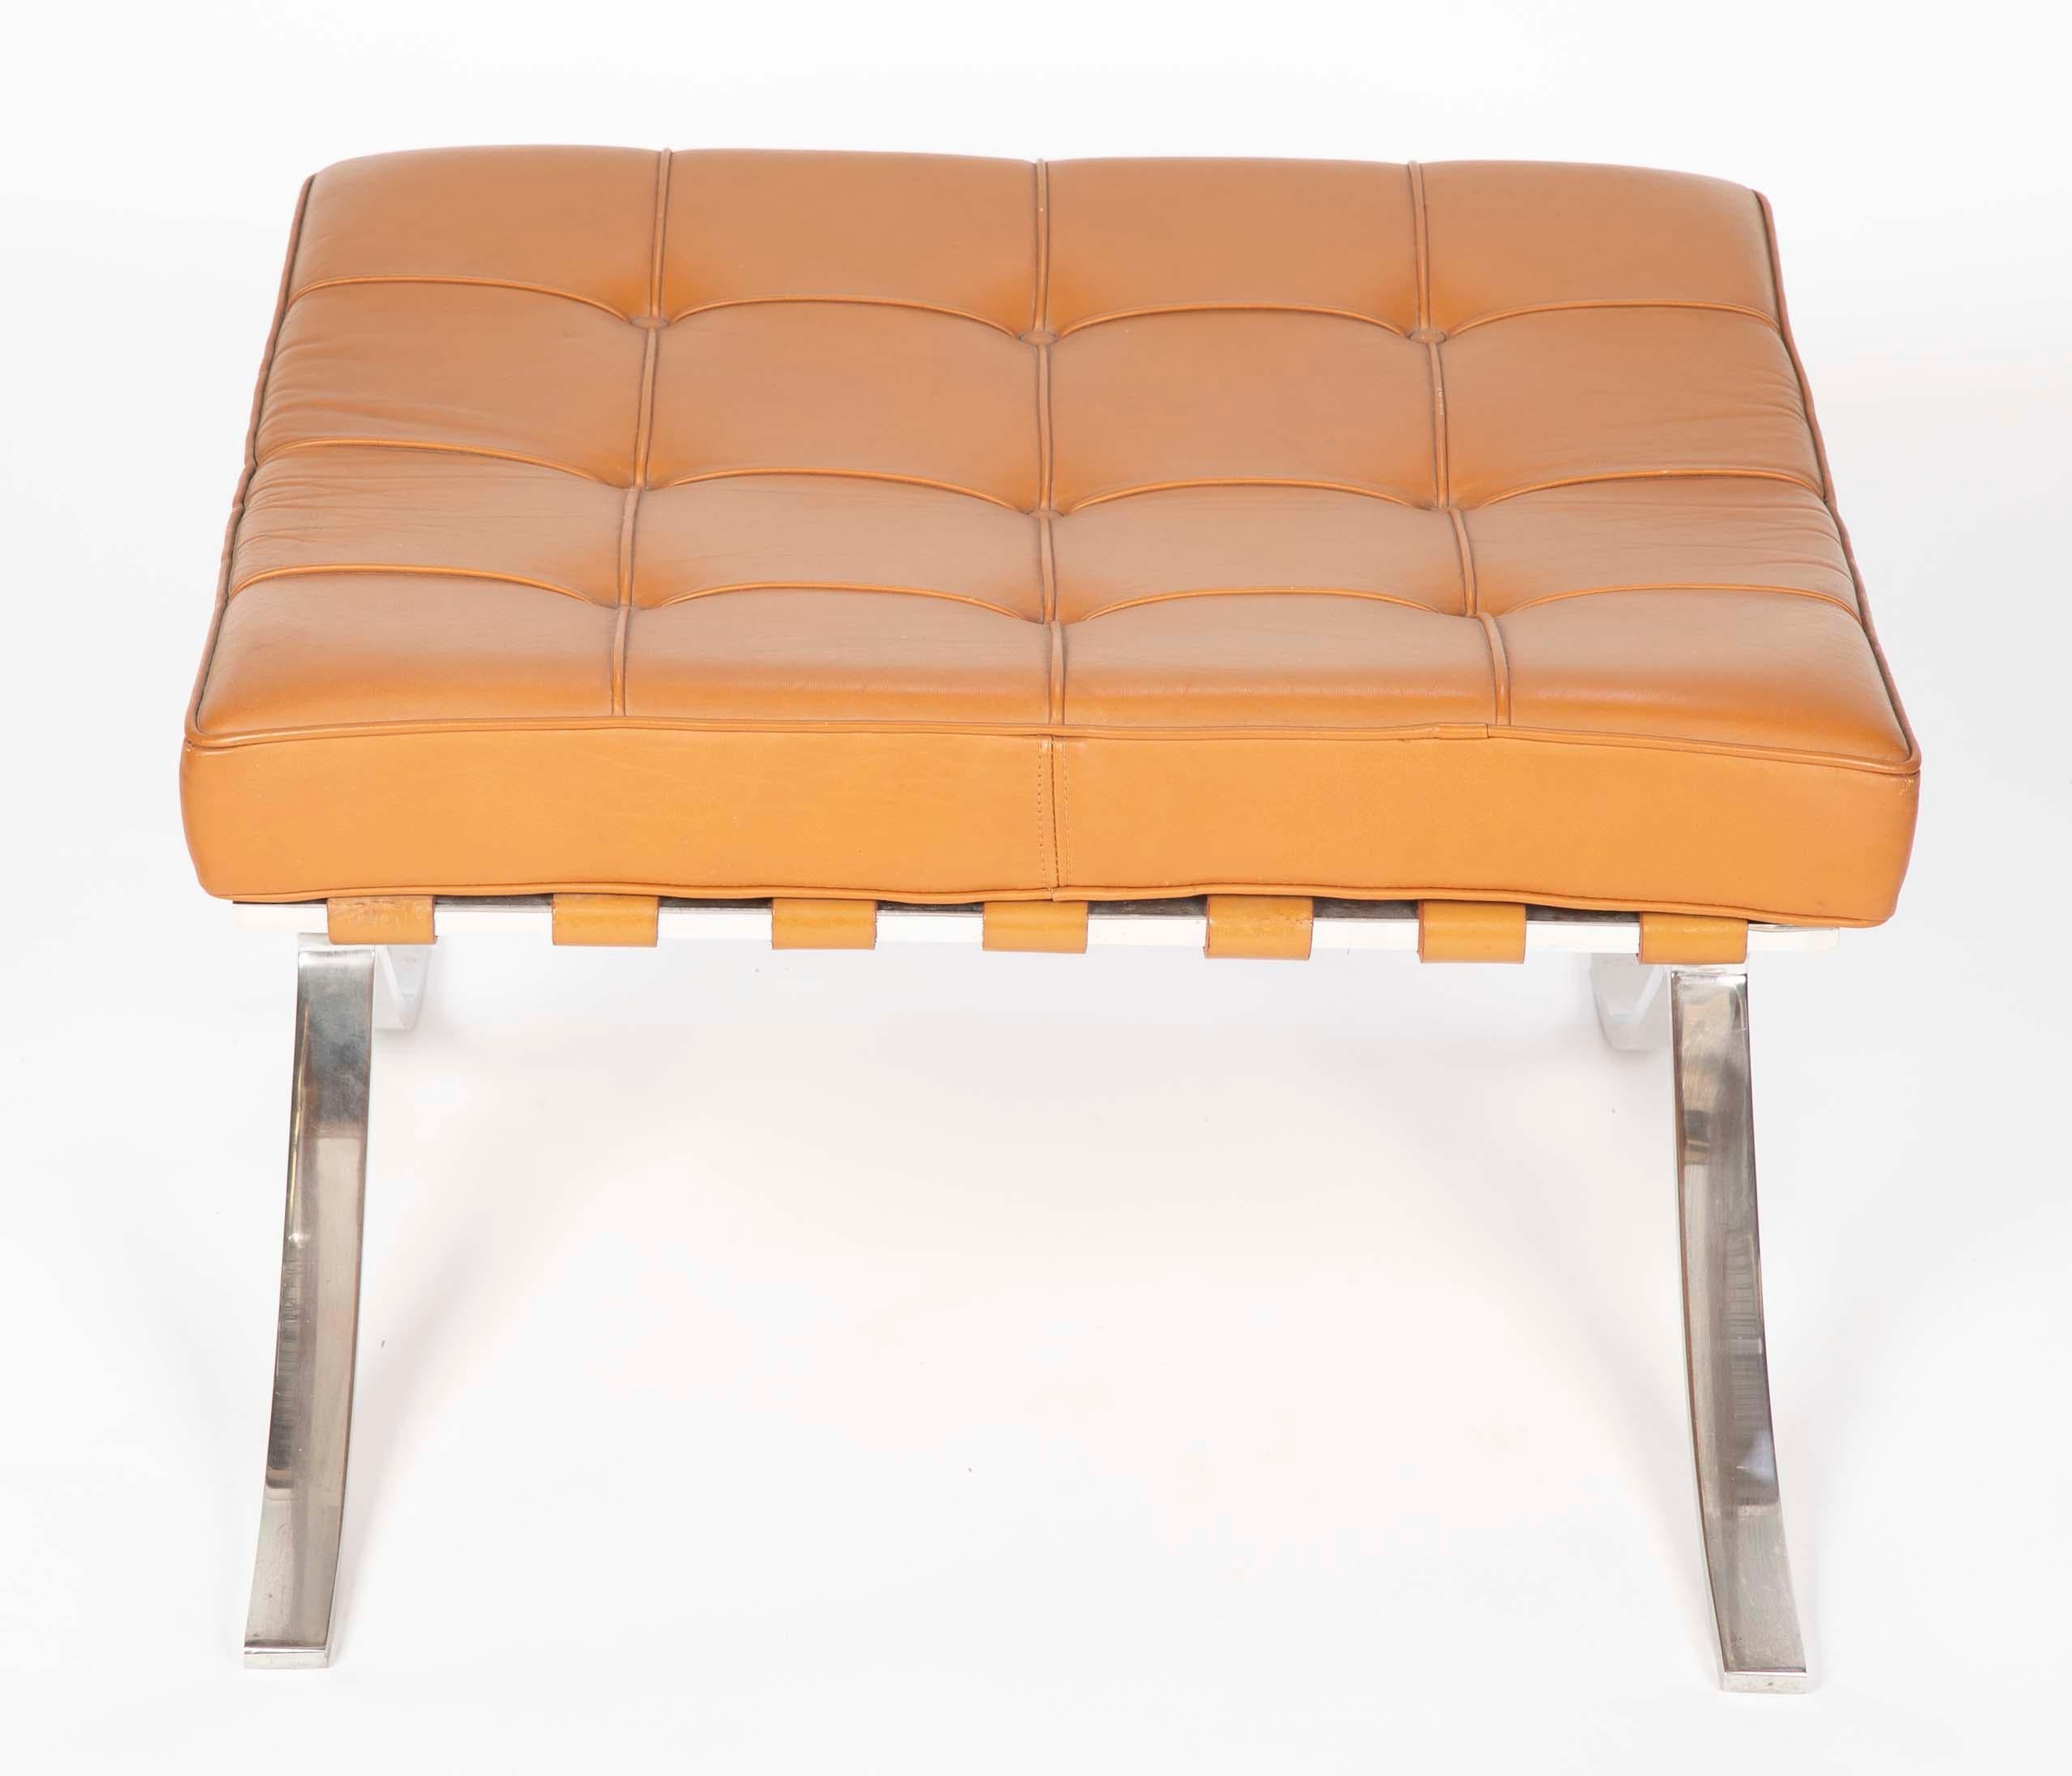 Pair of Mies van der Rohe for Knoll Barcelona ottomans with cognac leather upholstery, circa 1970s.